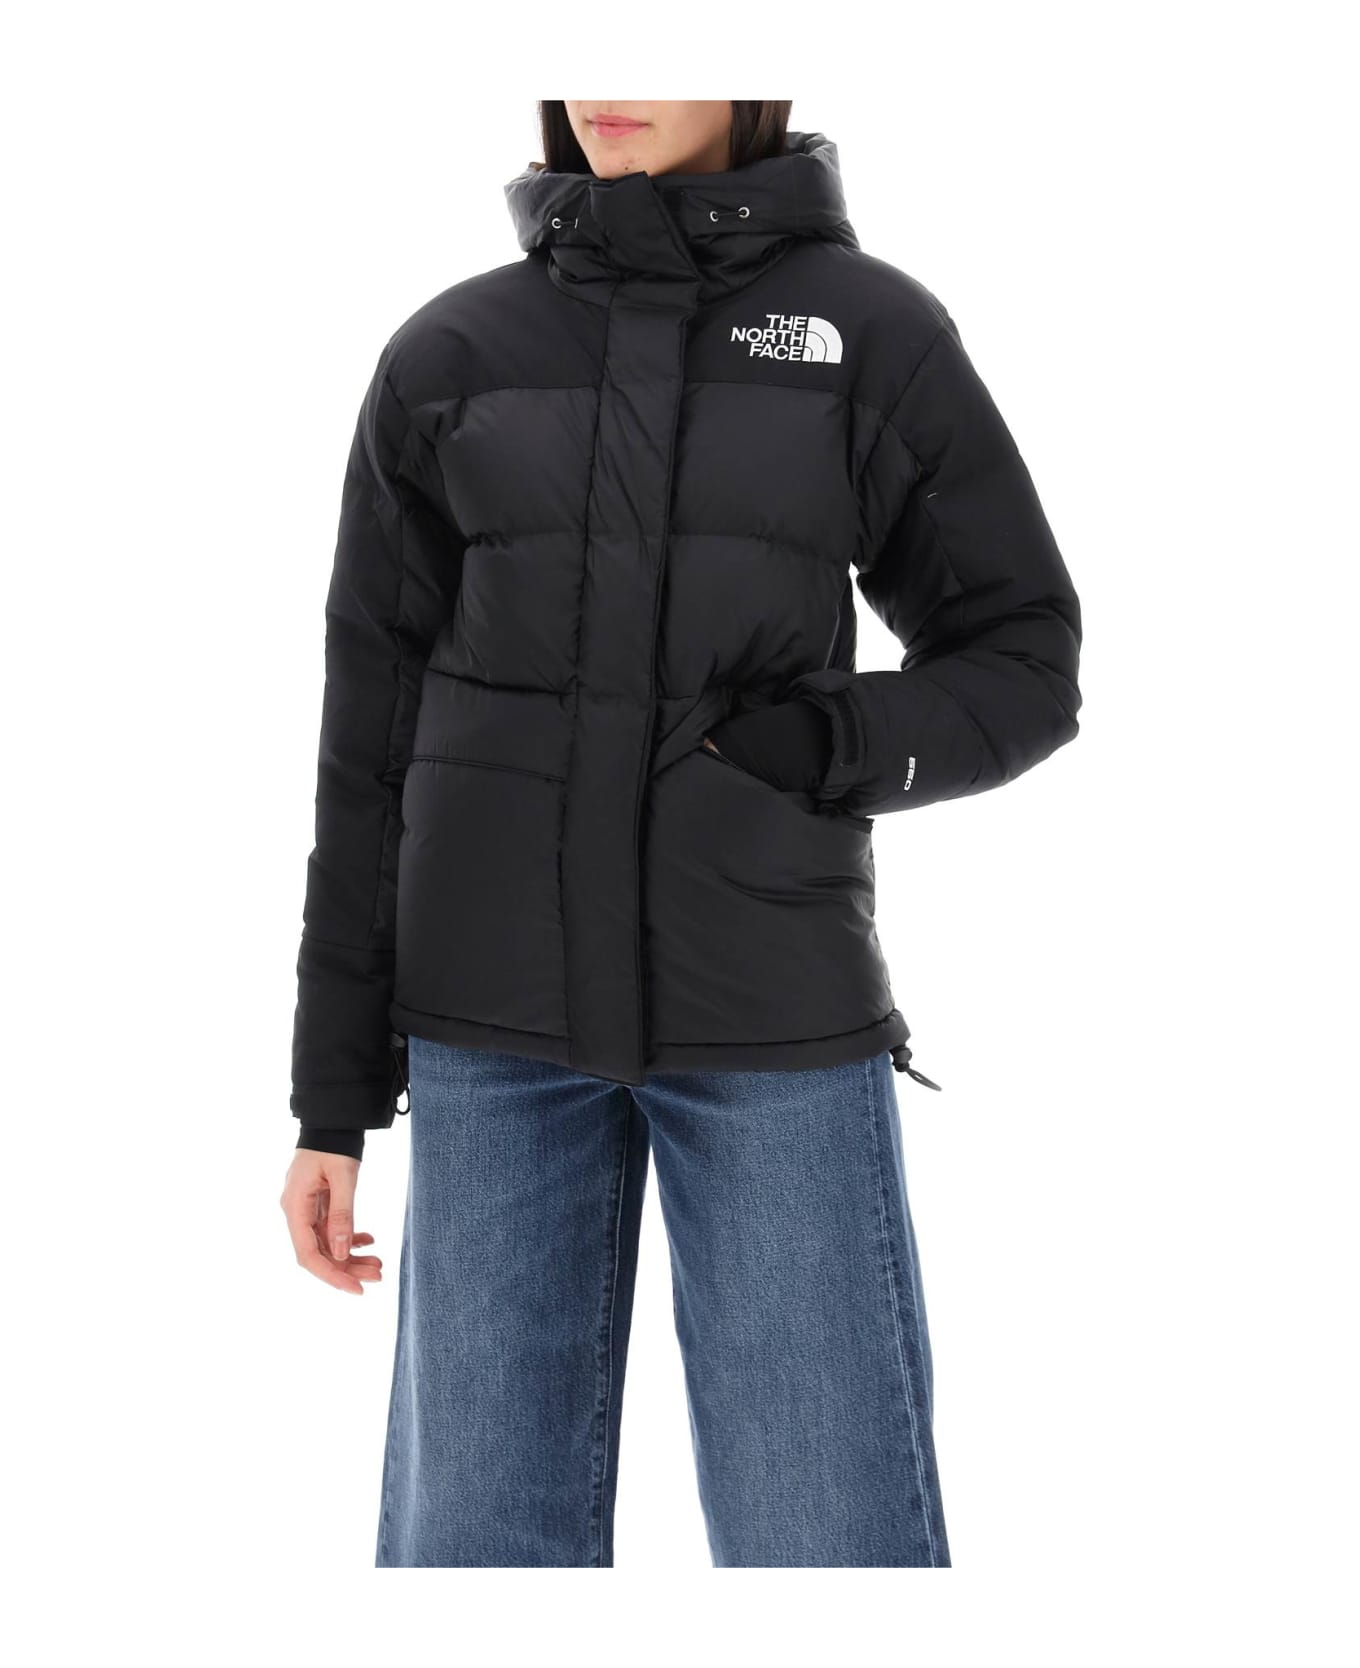 The North Face Himalayan Parka In Ripstop - TNF BLACK (Black)